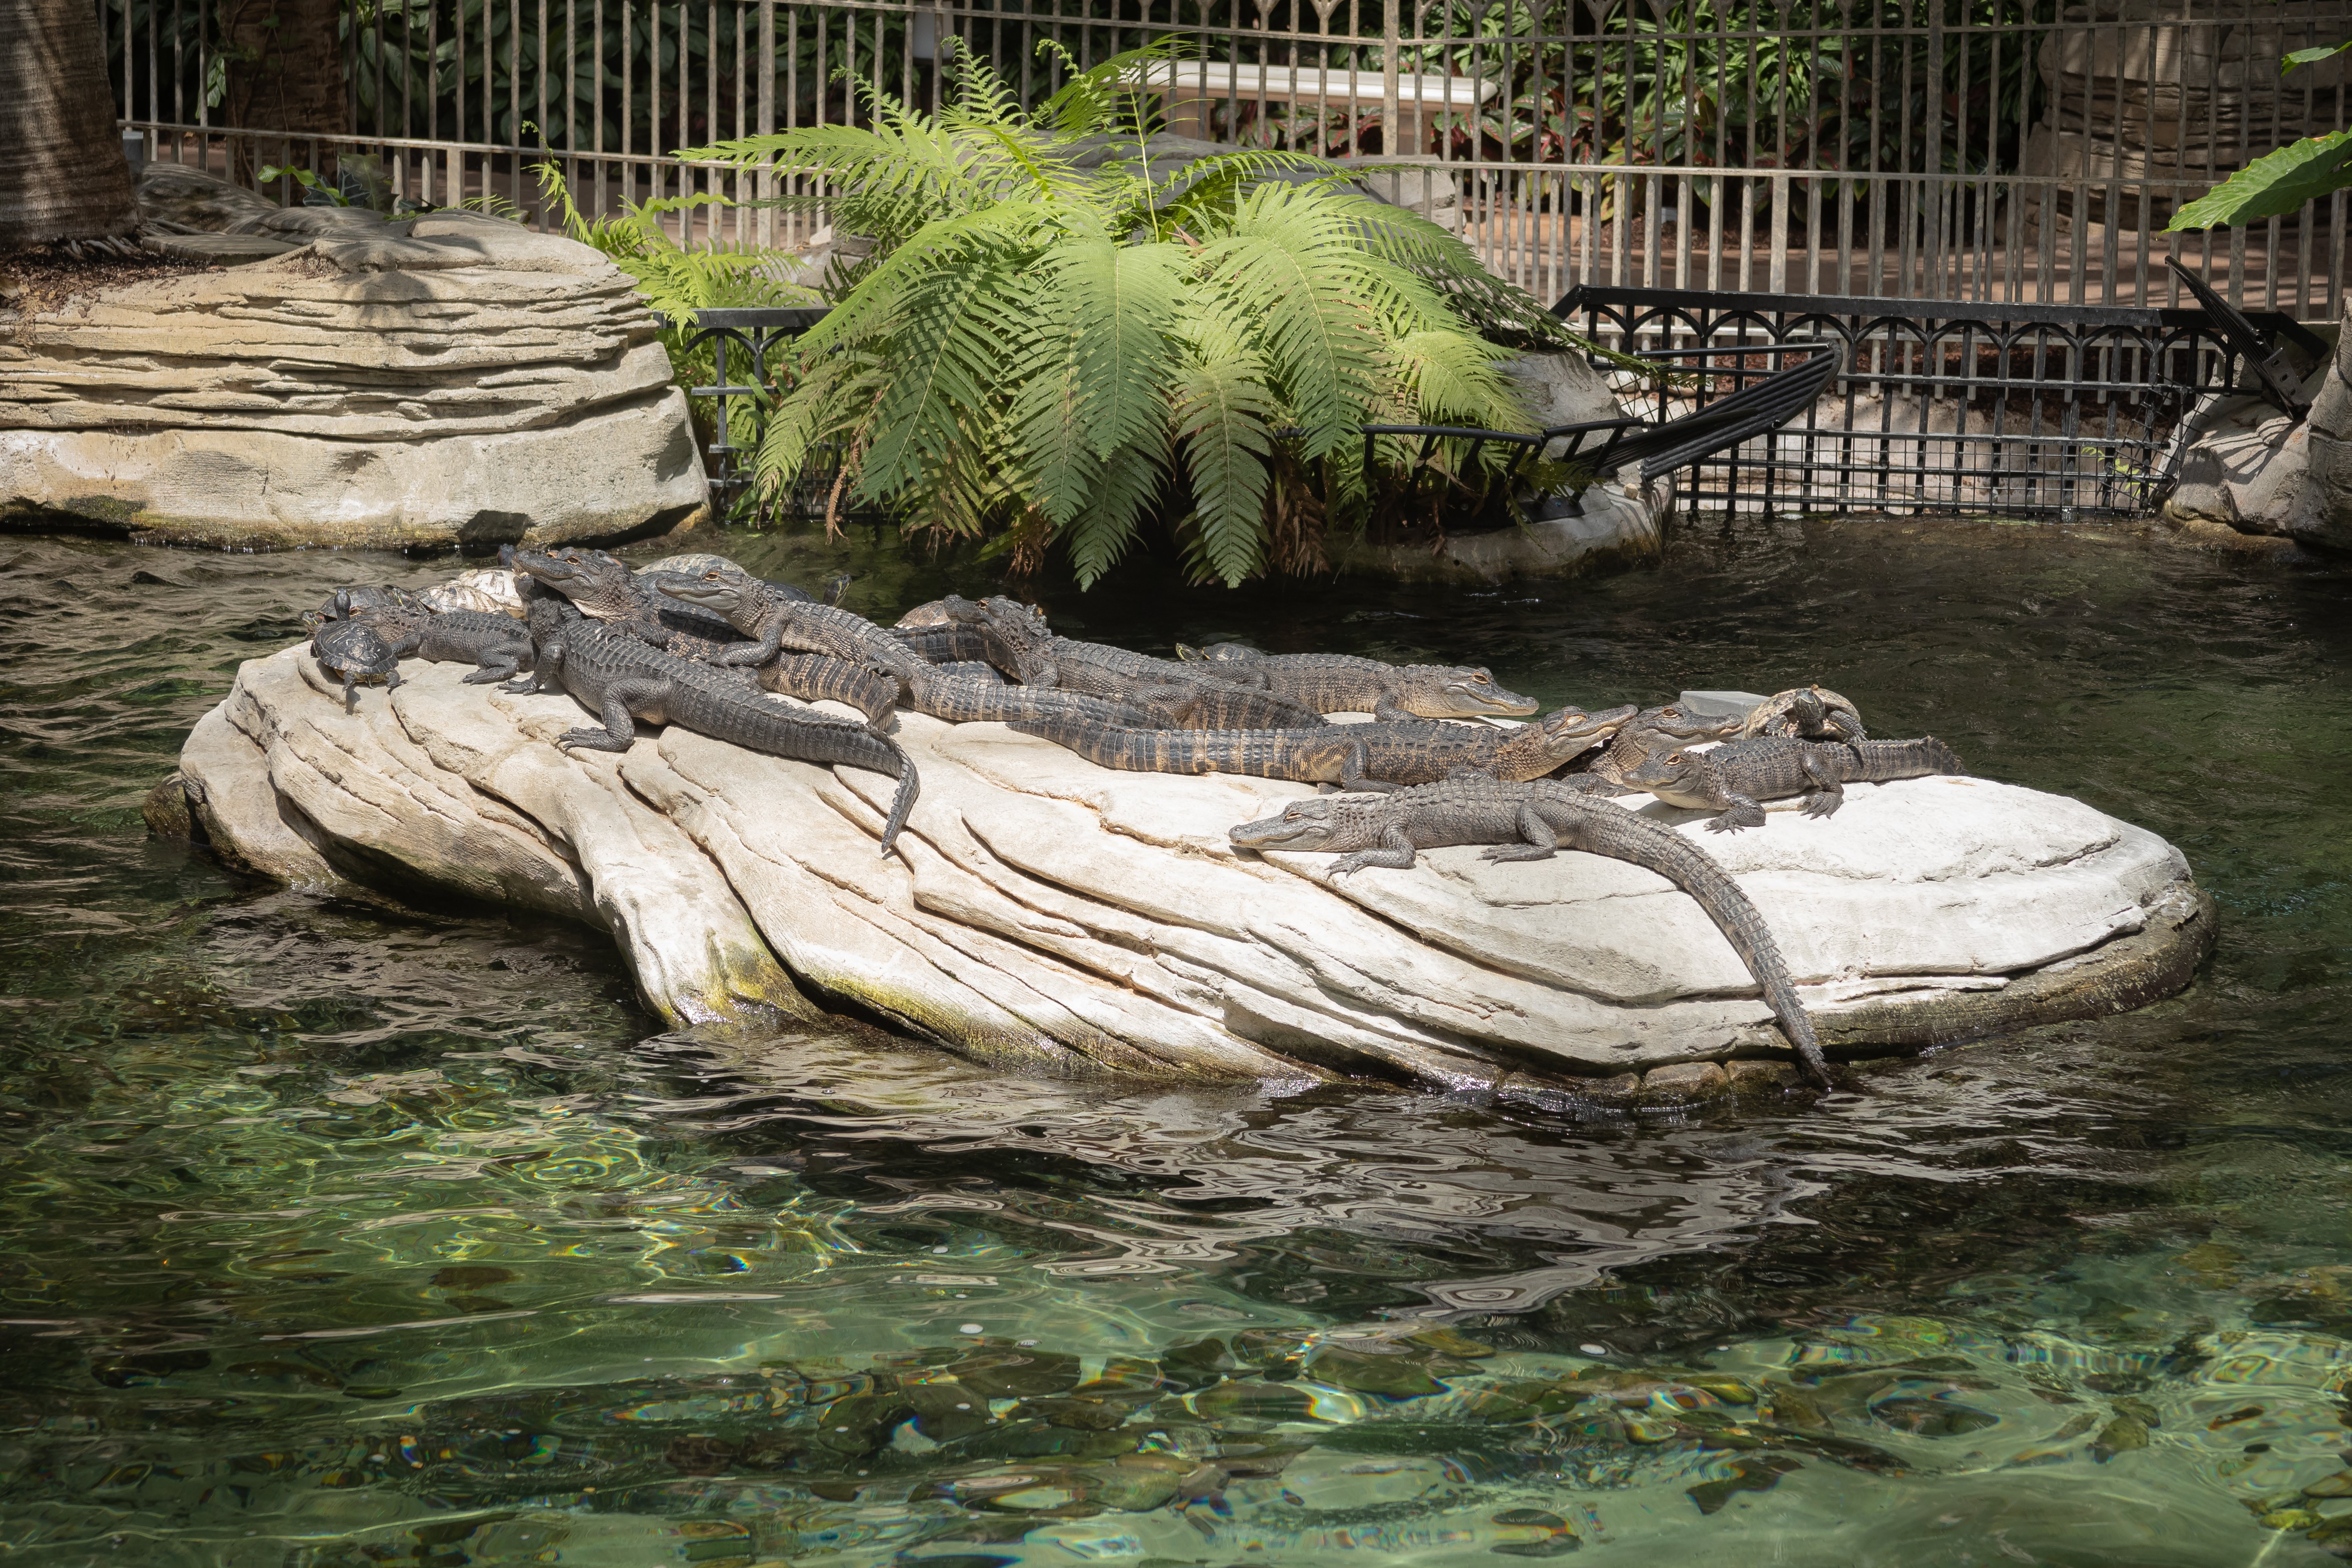 Gators on a rock at the Wild Florida exhibit at Gaylord Palms